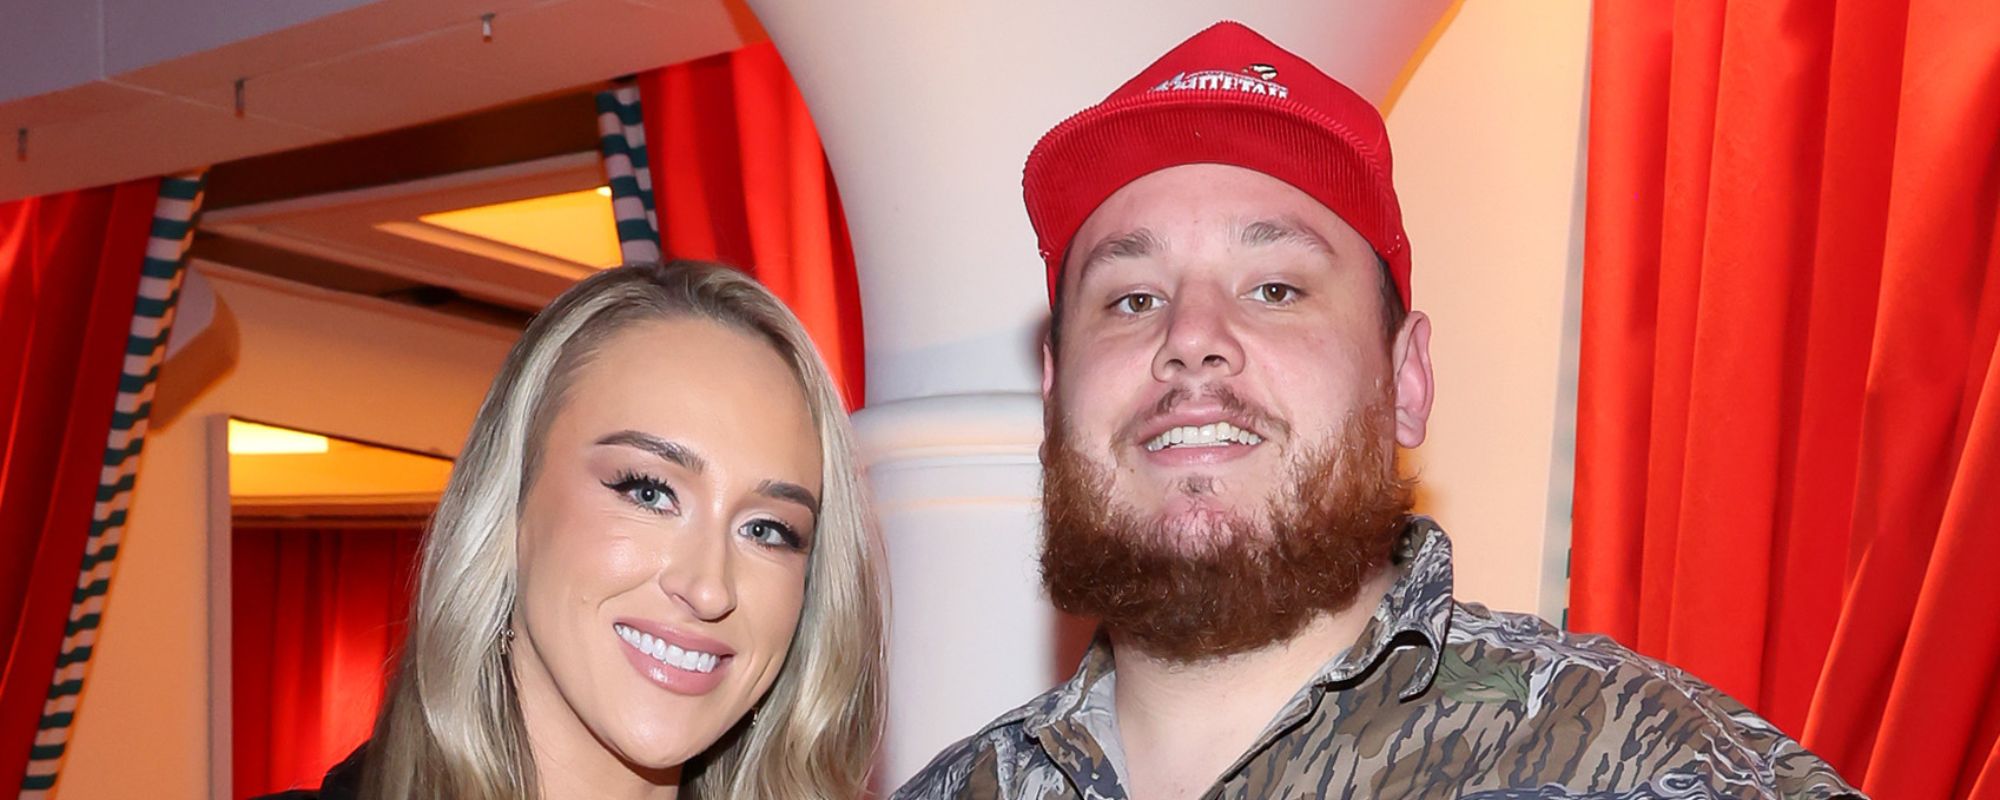 Luke Combs “Blindsides” Wife With Snippet of Unreleased Song